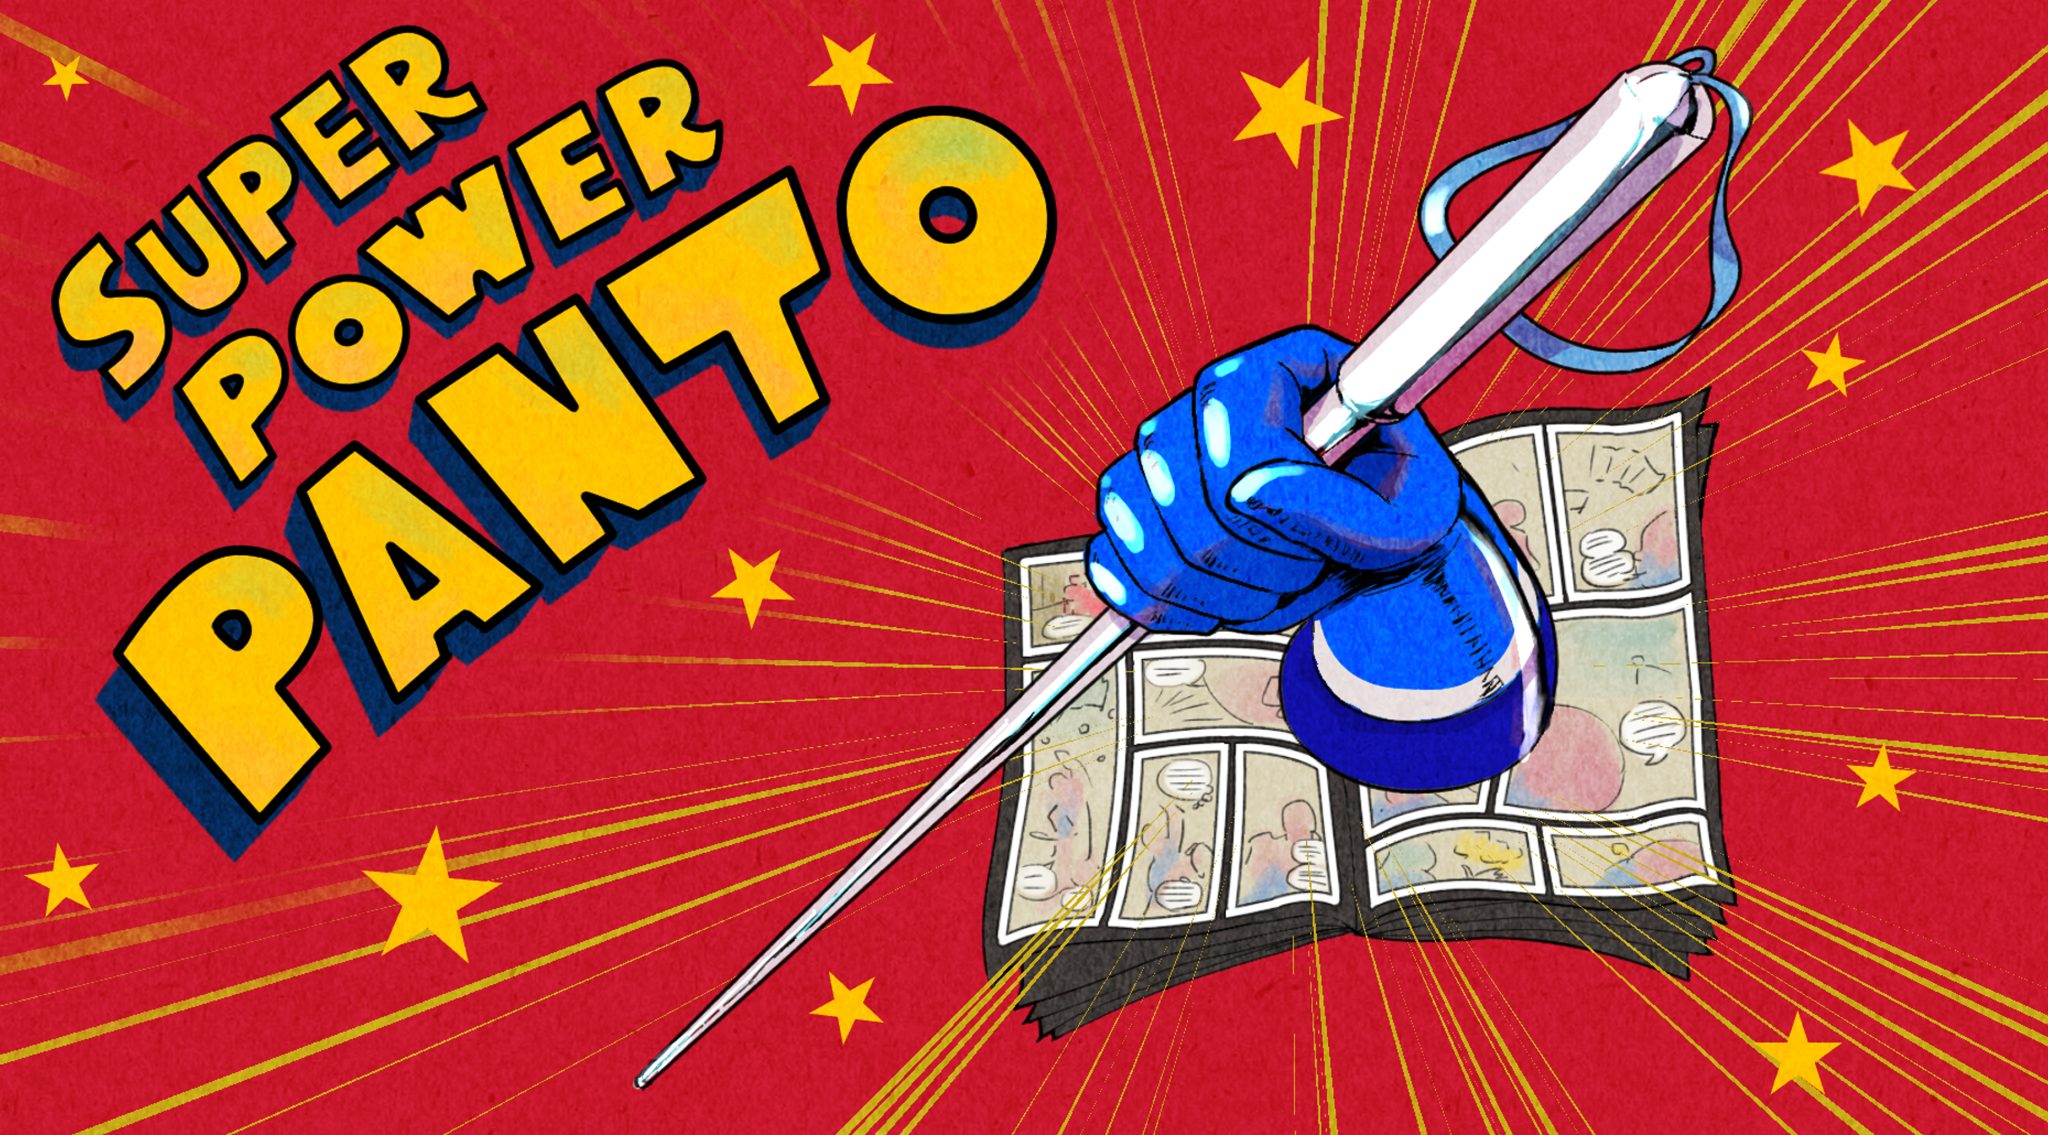 Super Power Panto Logo: In a comic book style, a blue gloved hand bursts out from the pages of a comic book, holding a white cane. Yellow action lines and stars surround it, flying out from the centre of the image. Slanted across the top left of the image the words 'Super Power Panto' are written in yellow blocky cartoon text, outlined in black and with a blue drop shadow. All of this is in front of a deep red background.